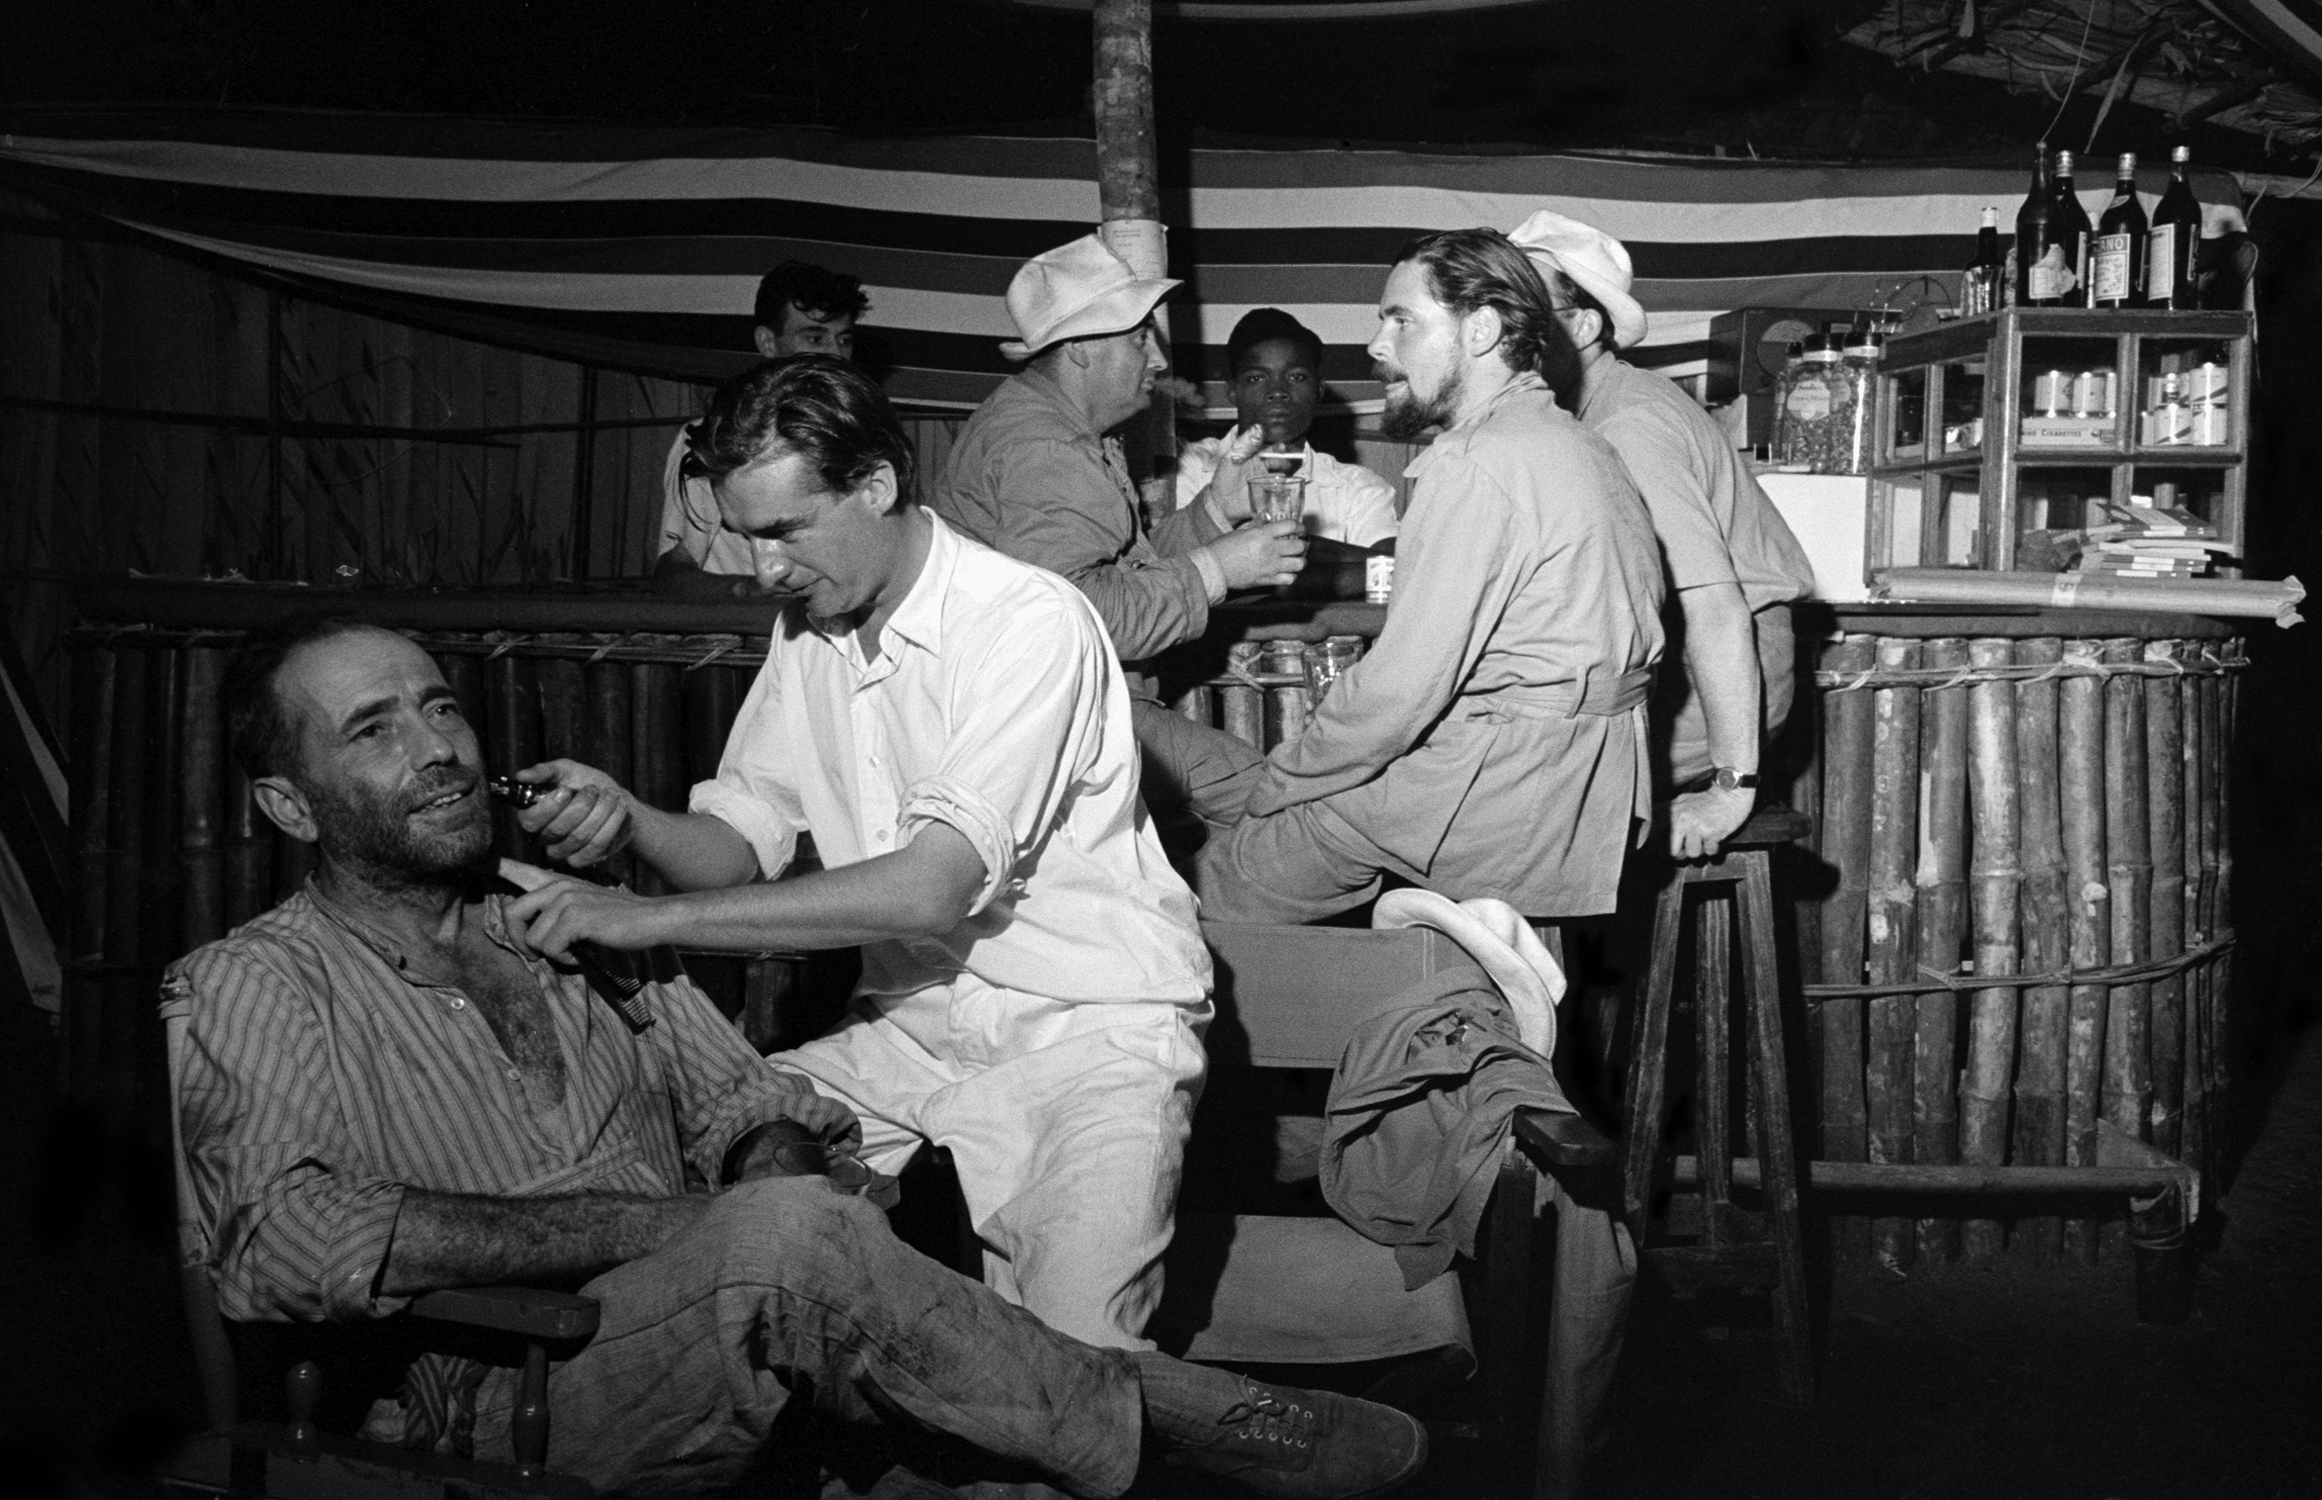 Humphrey Bogart's beard gets a touch-up during filming of The African Queen.